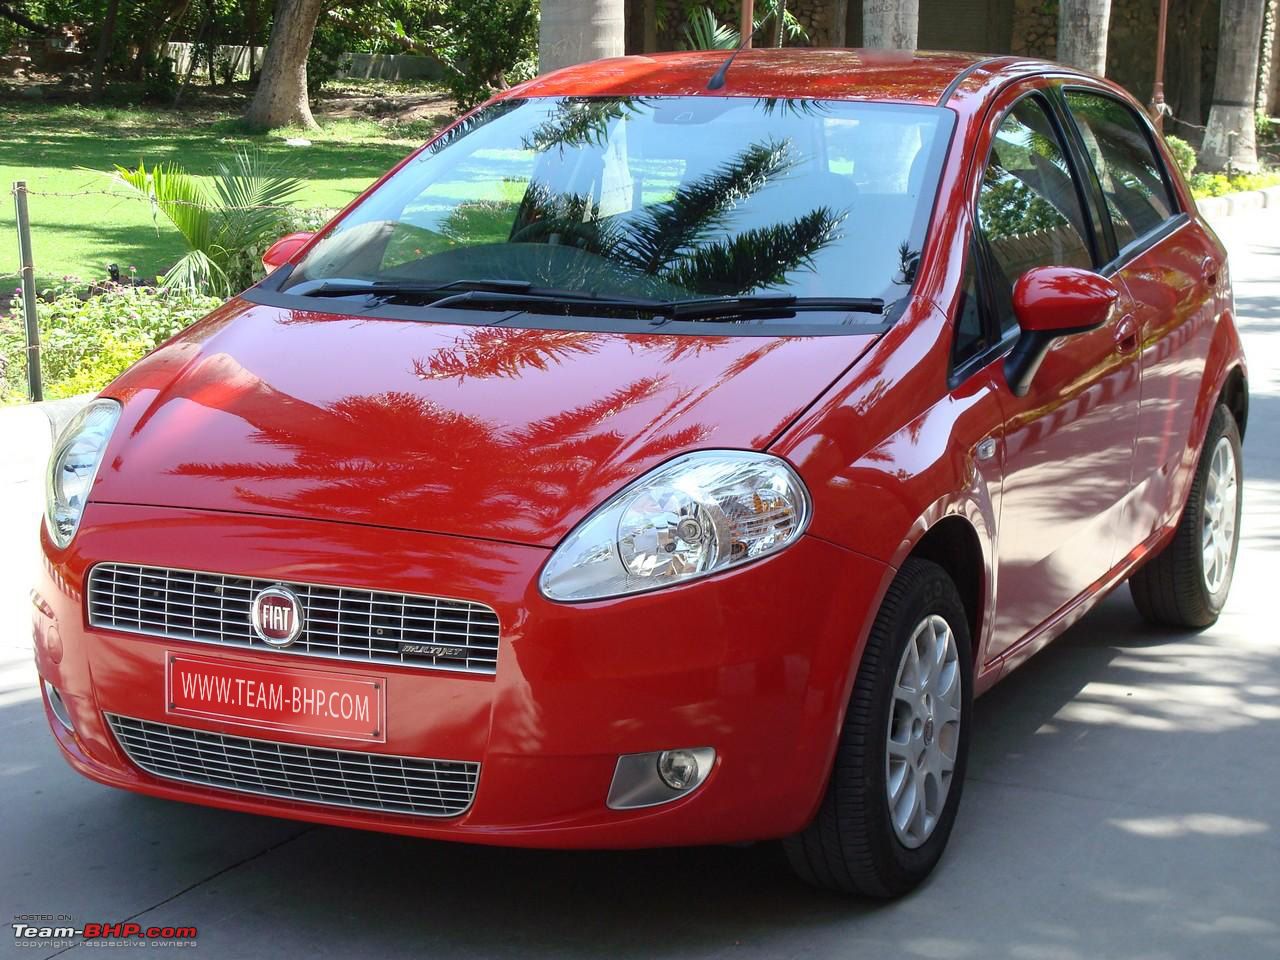 New Fiat Punto: for India only?